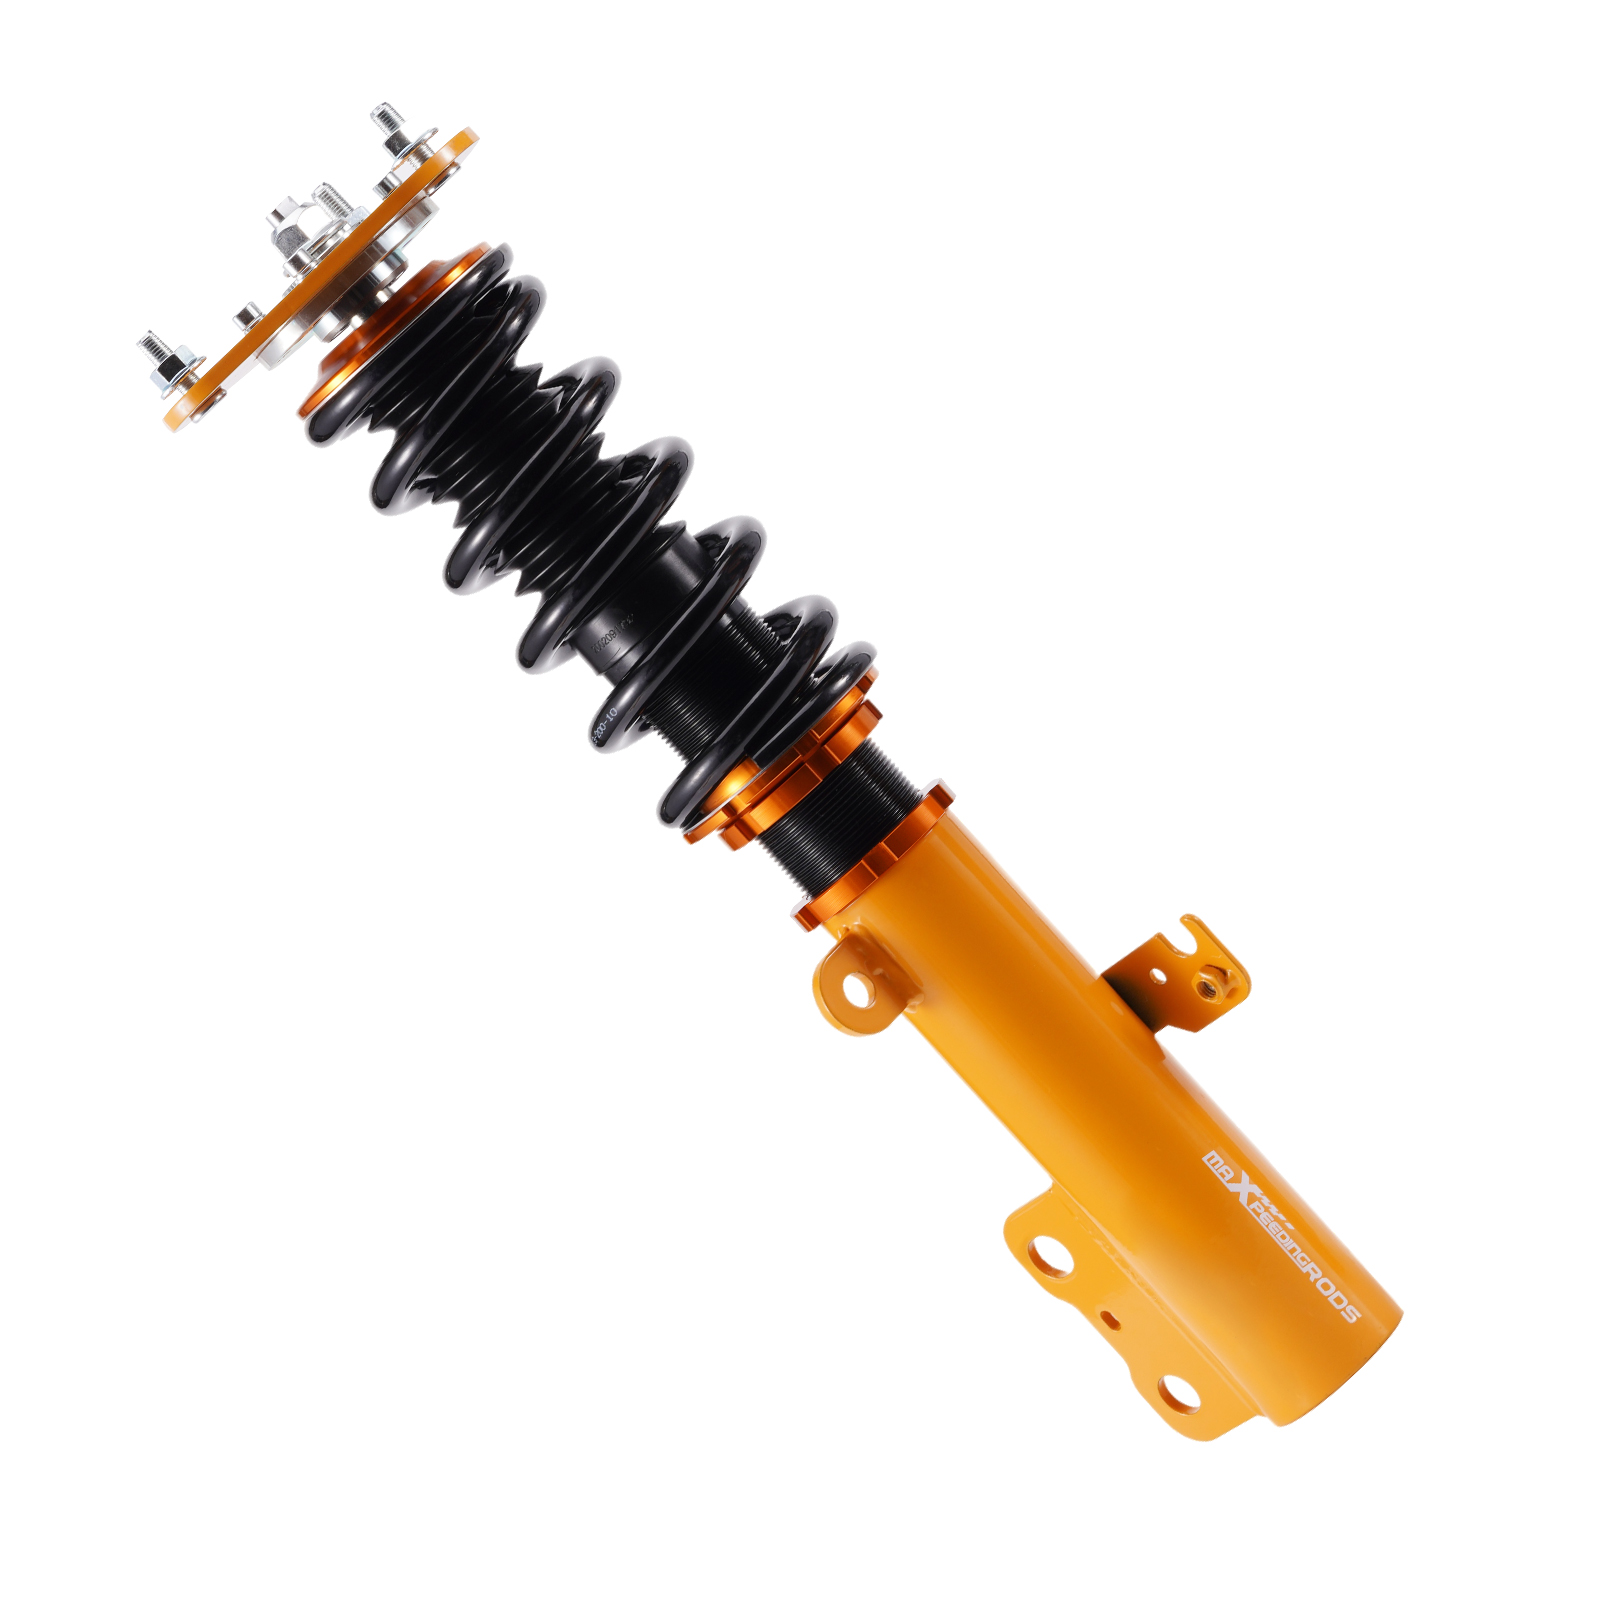 Coilovers Suspension Kit For Scion tC 05-10 (ANT10) Adjustable Height